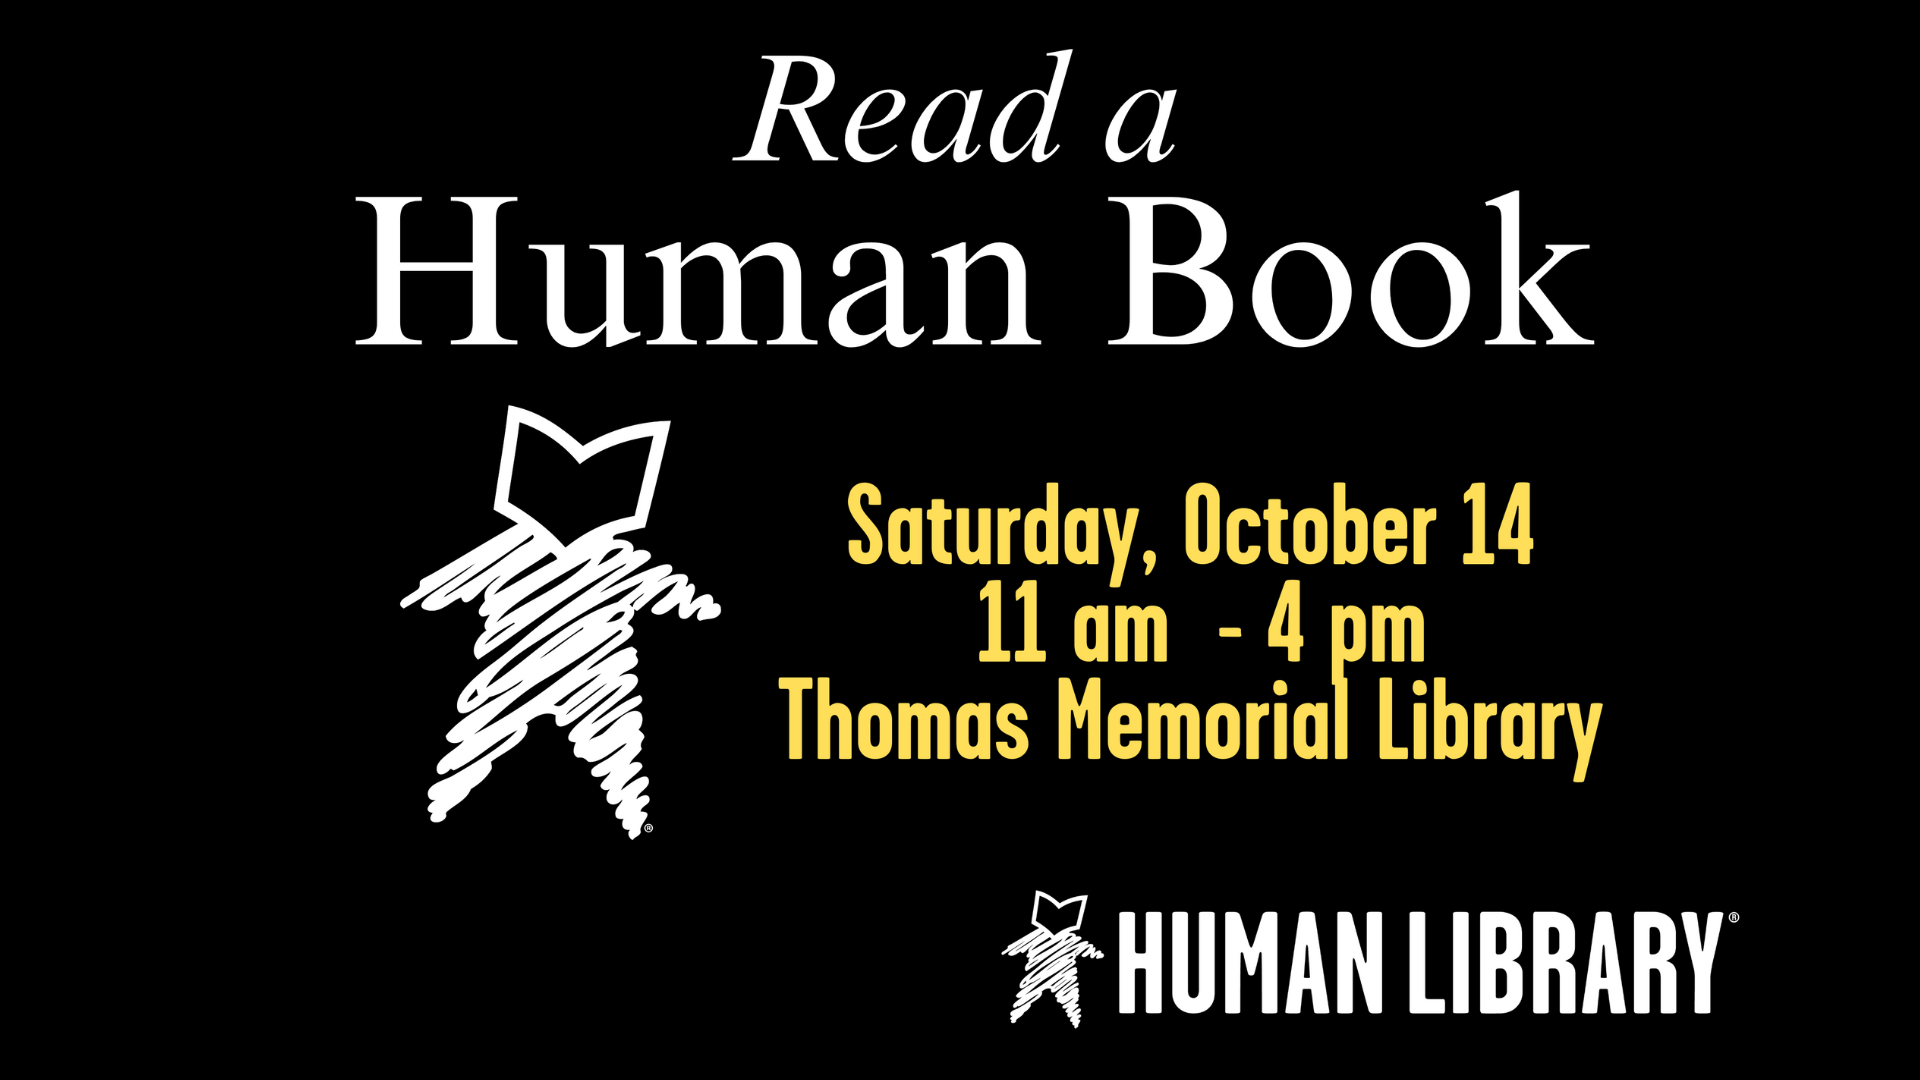 Read a Human Book on October 14 from 11 am to 4 pm